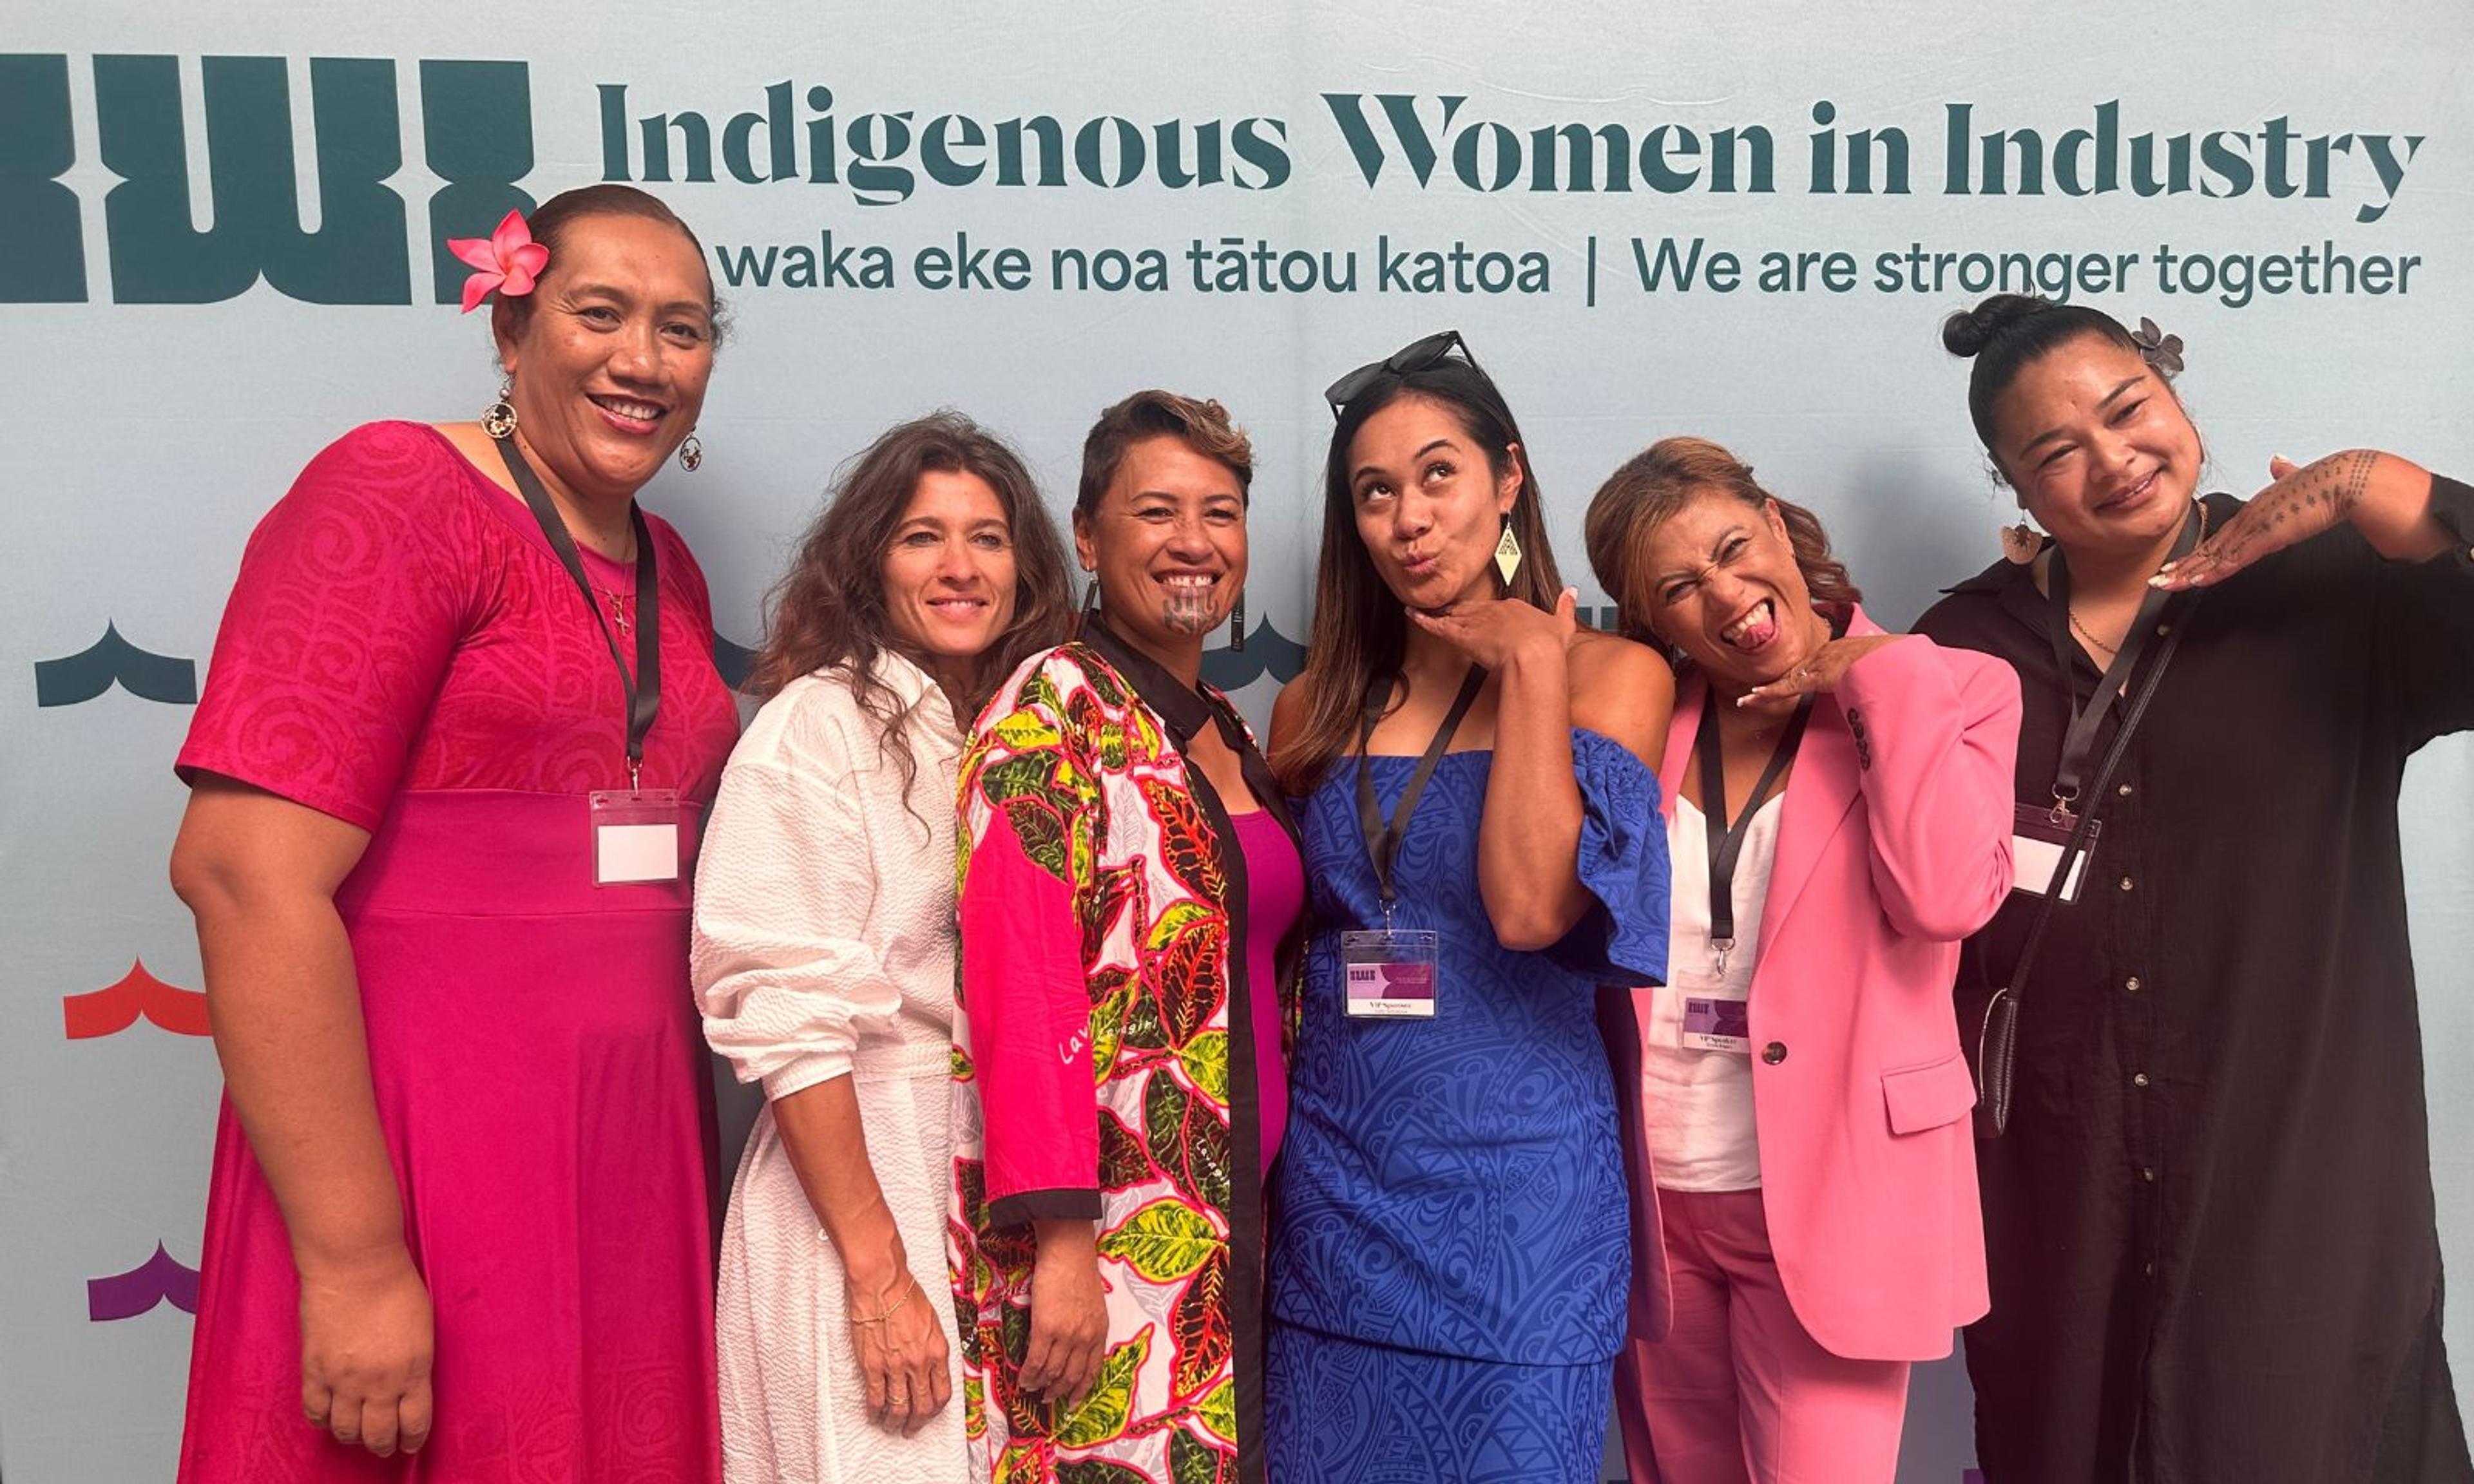 IWI co-founder Rachel Petero (printed dress) pictured with the Media and Film panellists, Chelsea Winstanley (white dress), Gaby Solomona (blue dress), and Nevak Rogers (pink suit).